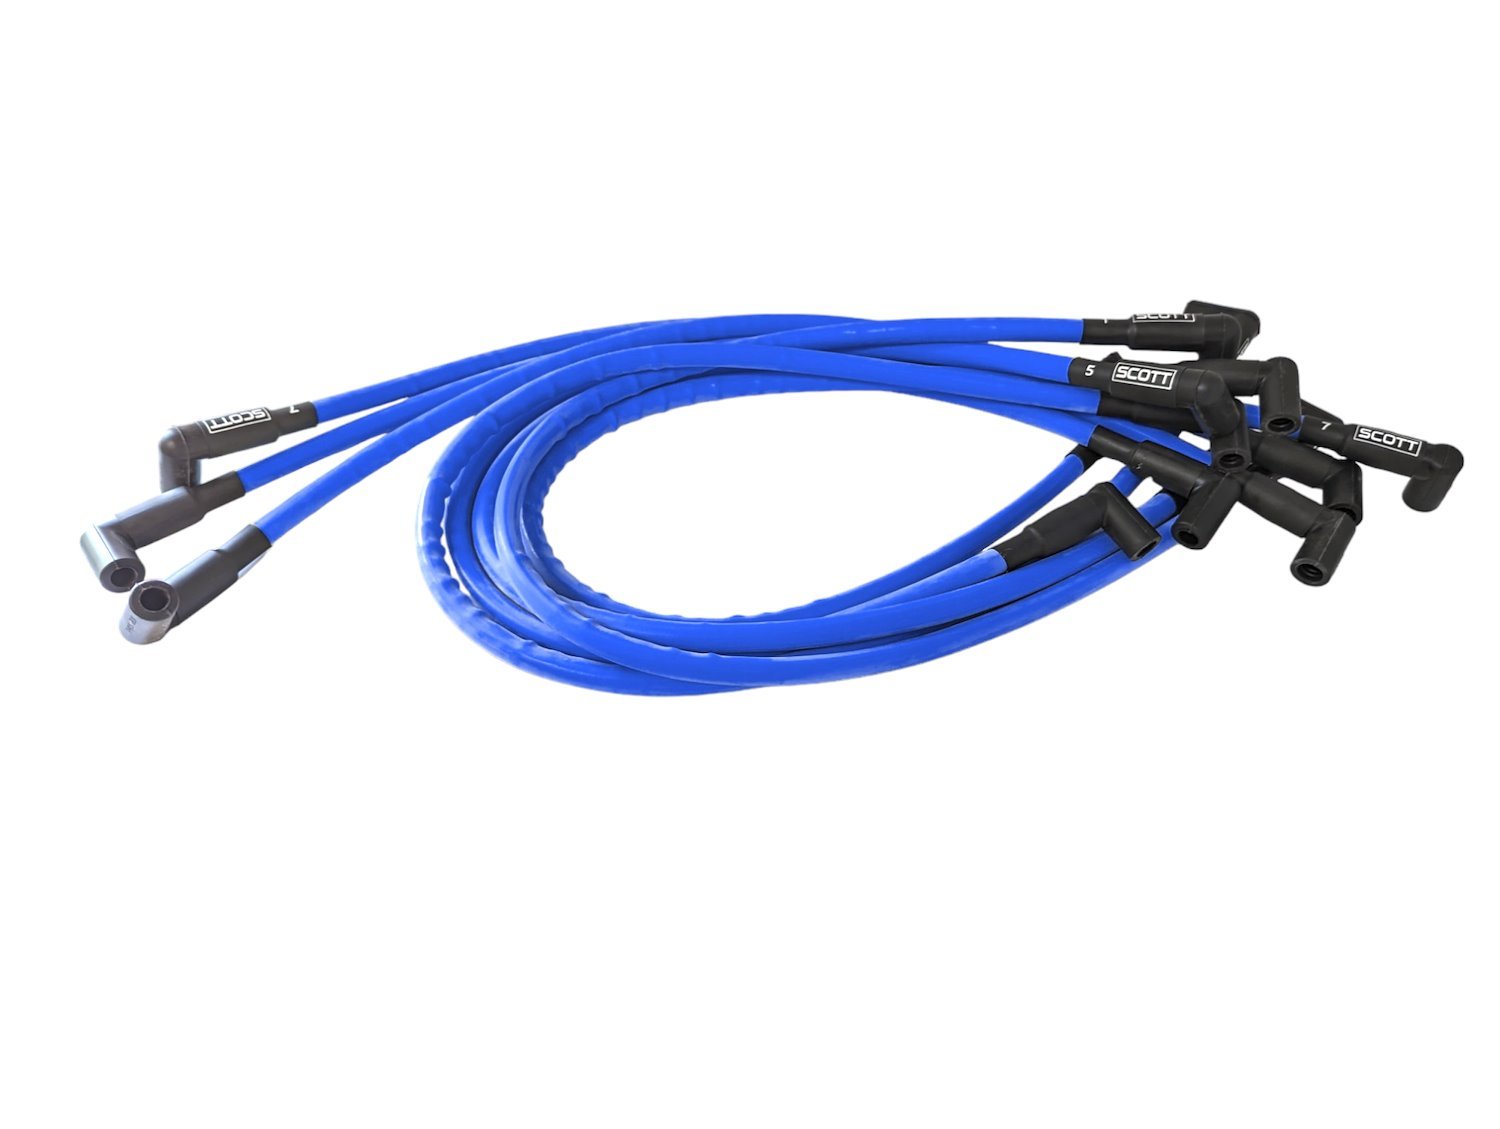 SPW-CH-435-4 High-Performance Silicone-Sleeved Spark Plug Wire Set for Small Block Chevy, Around Front [Blue]